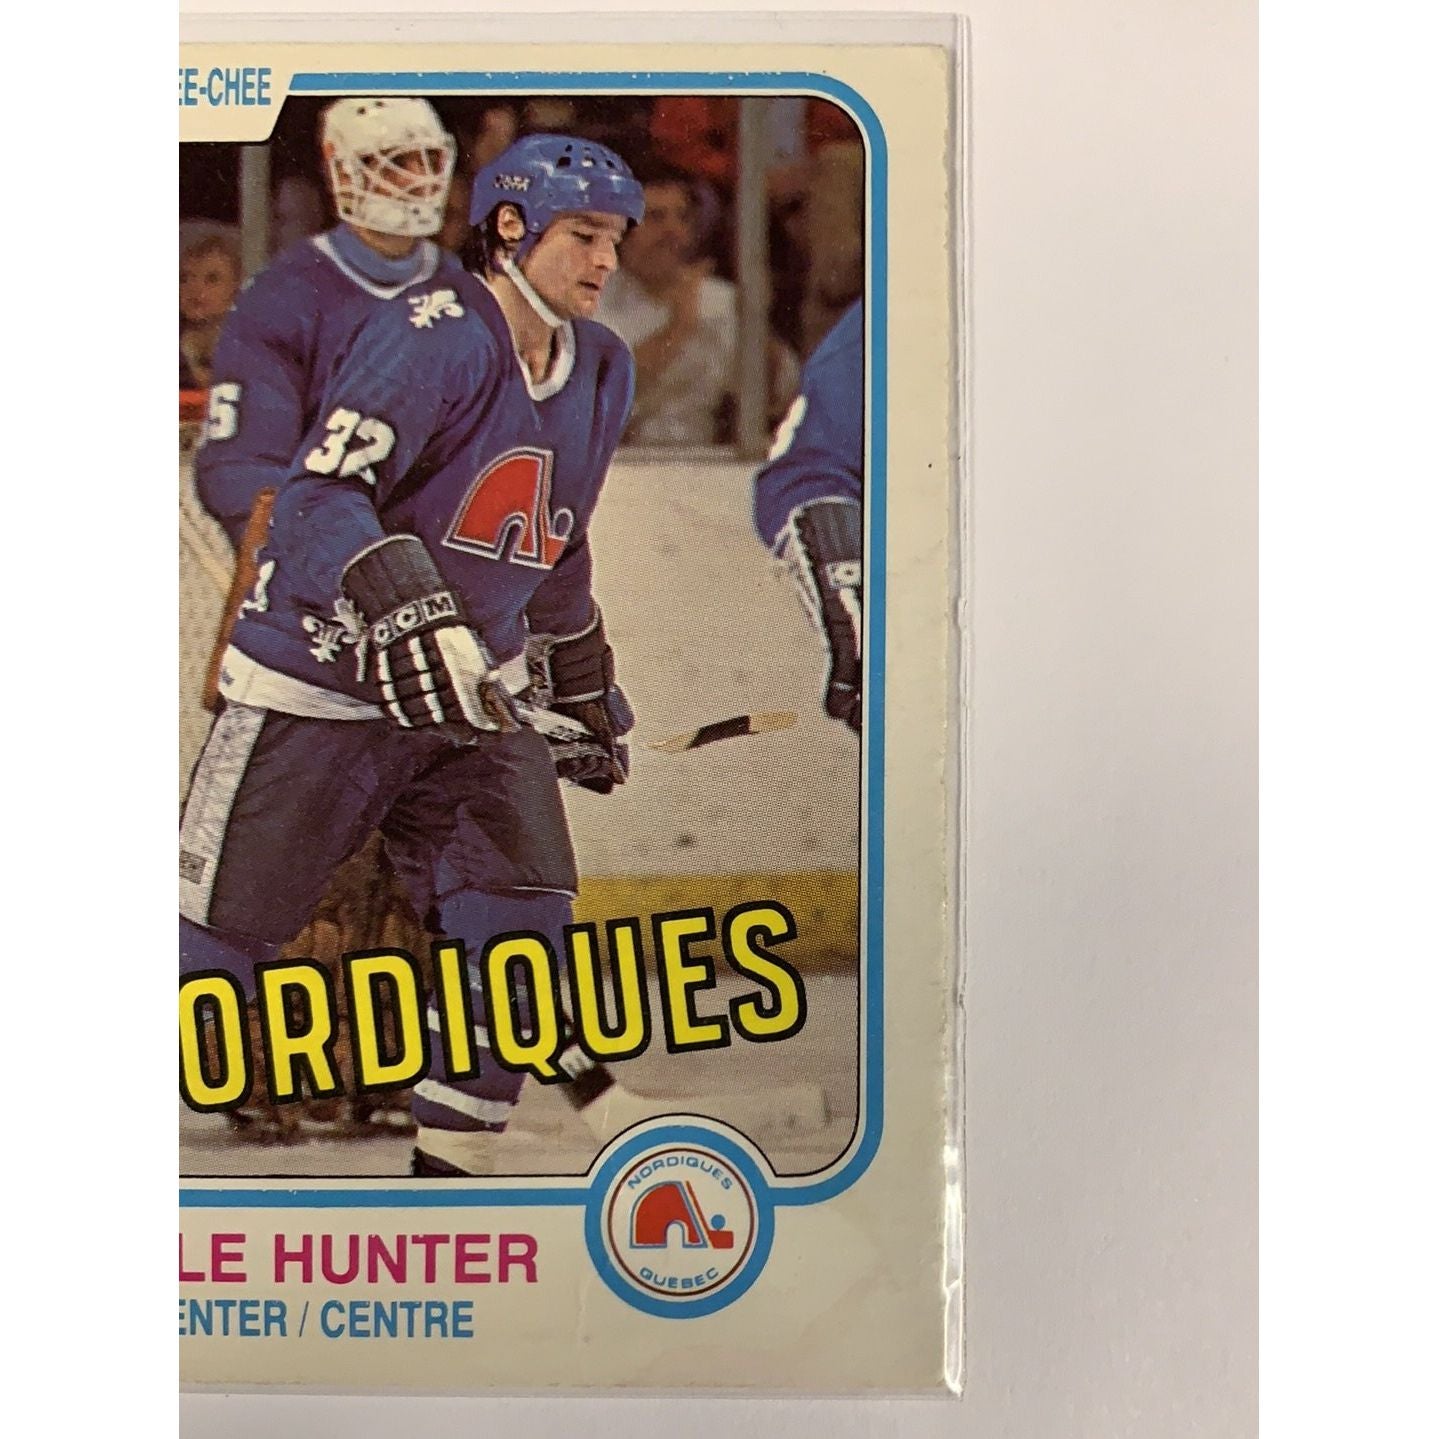  1981-82 O-Pee-Chee Dale Hunter Rookie Card  Local Legends Cards & Collectibles